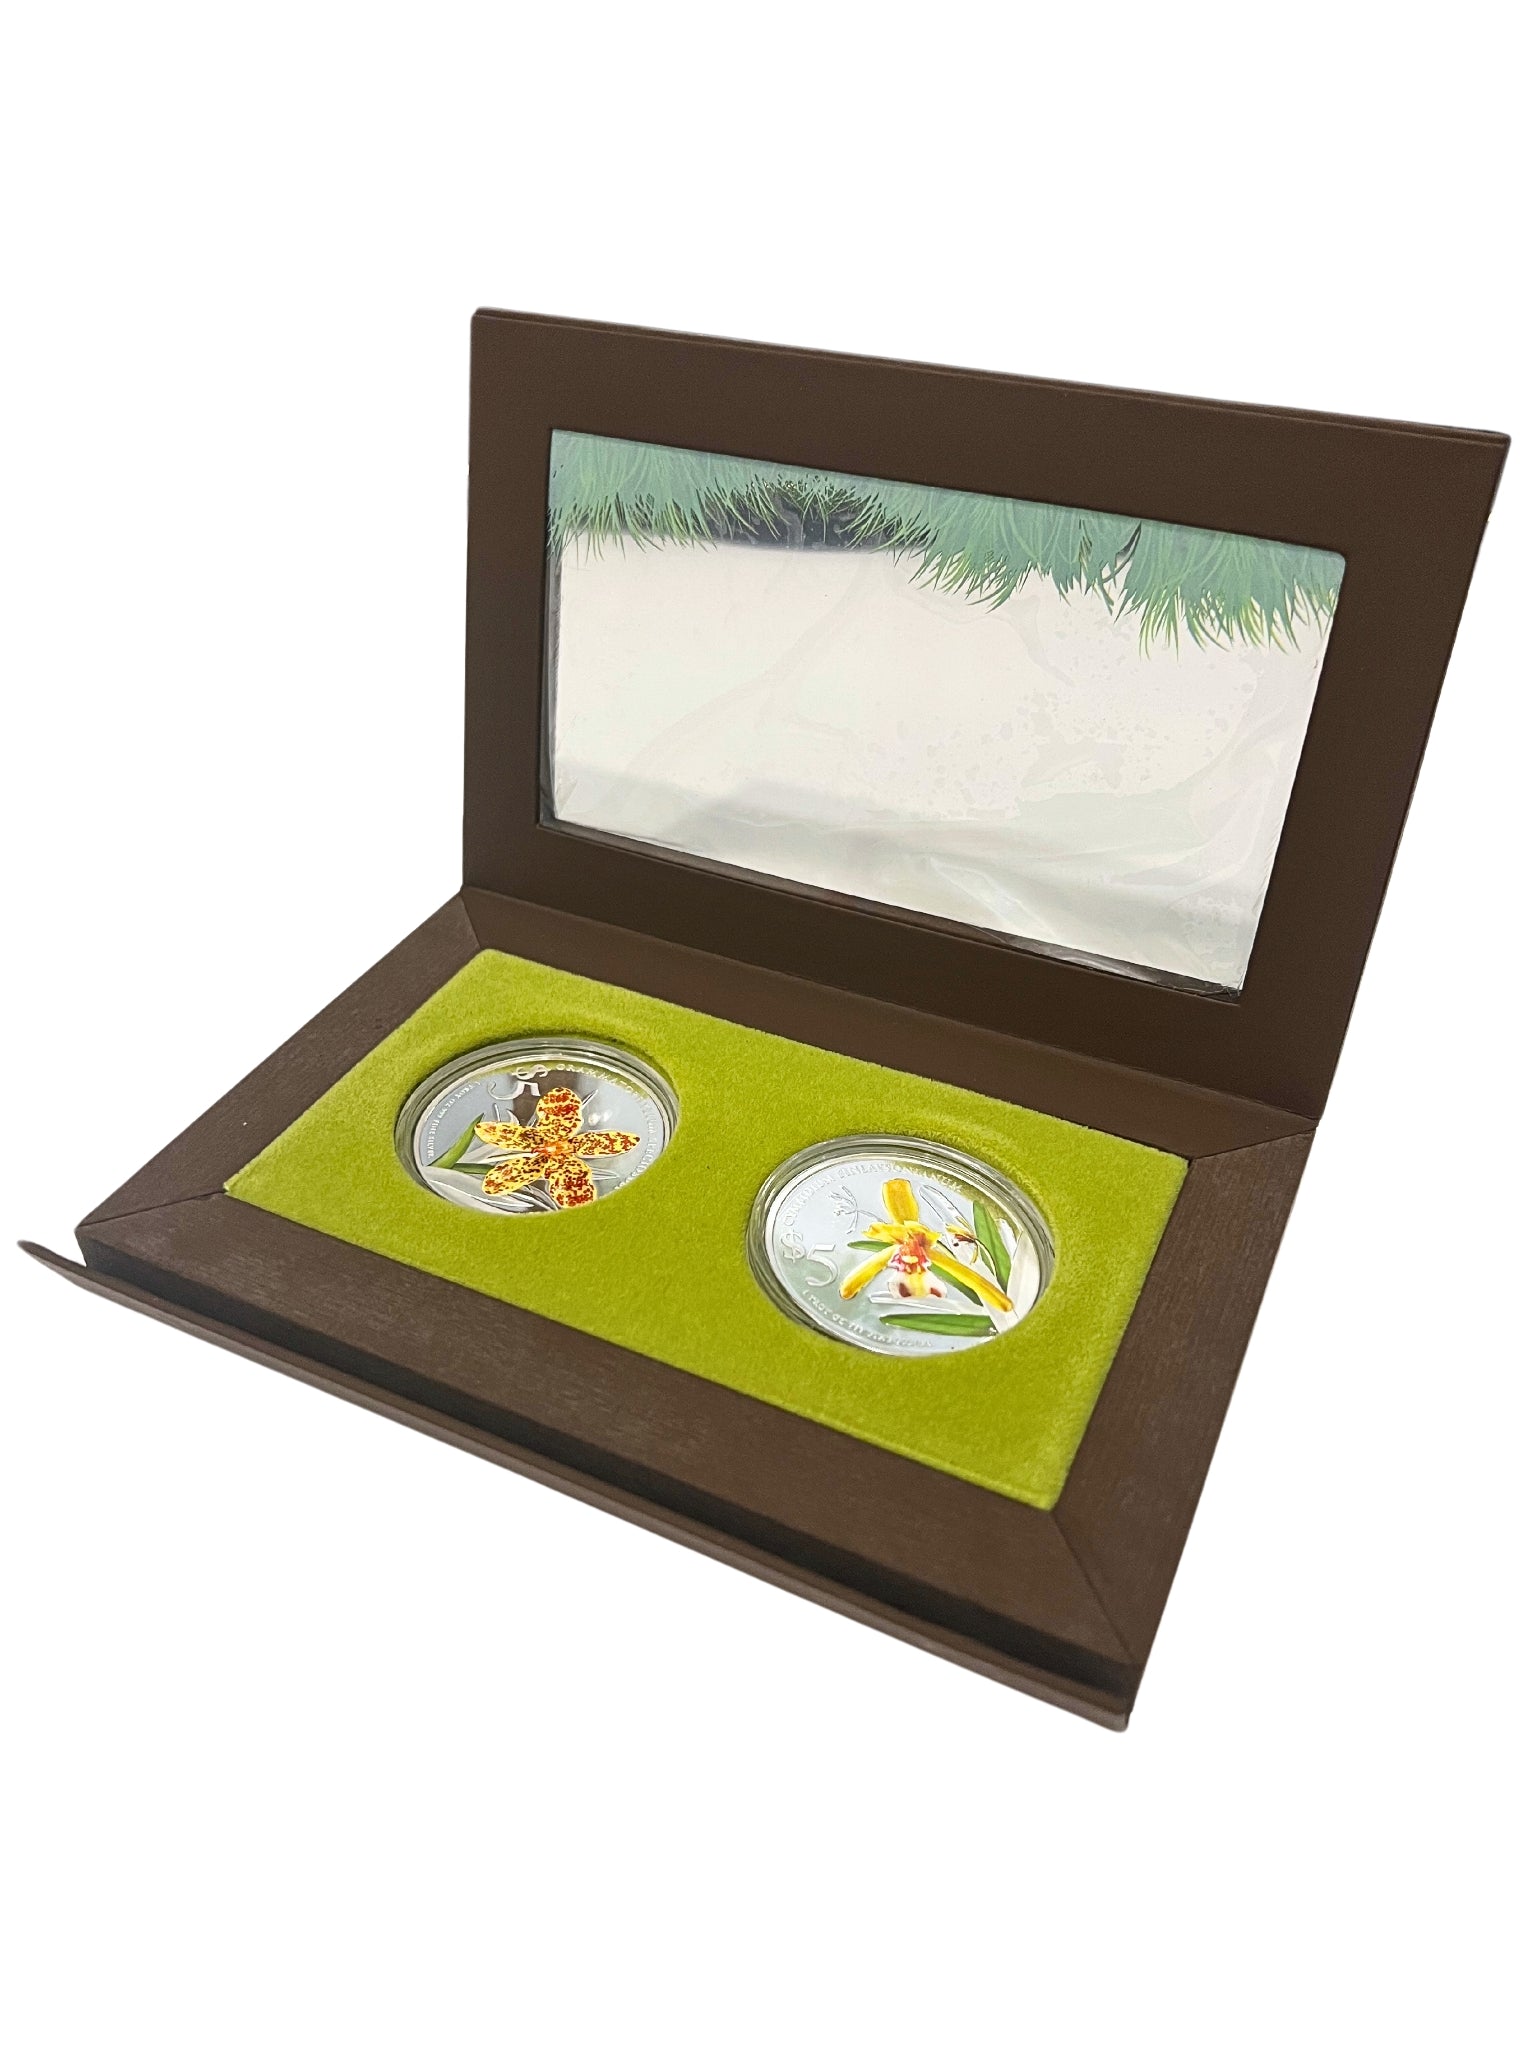 2011 Native Orchid Of Singapore Coin Set